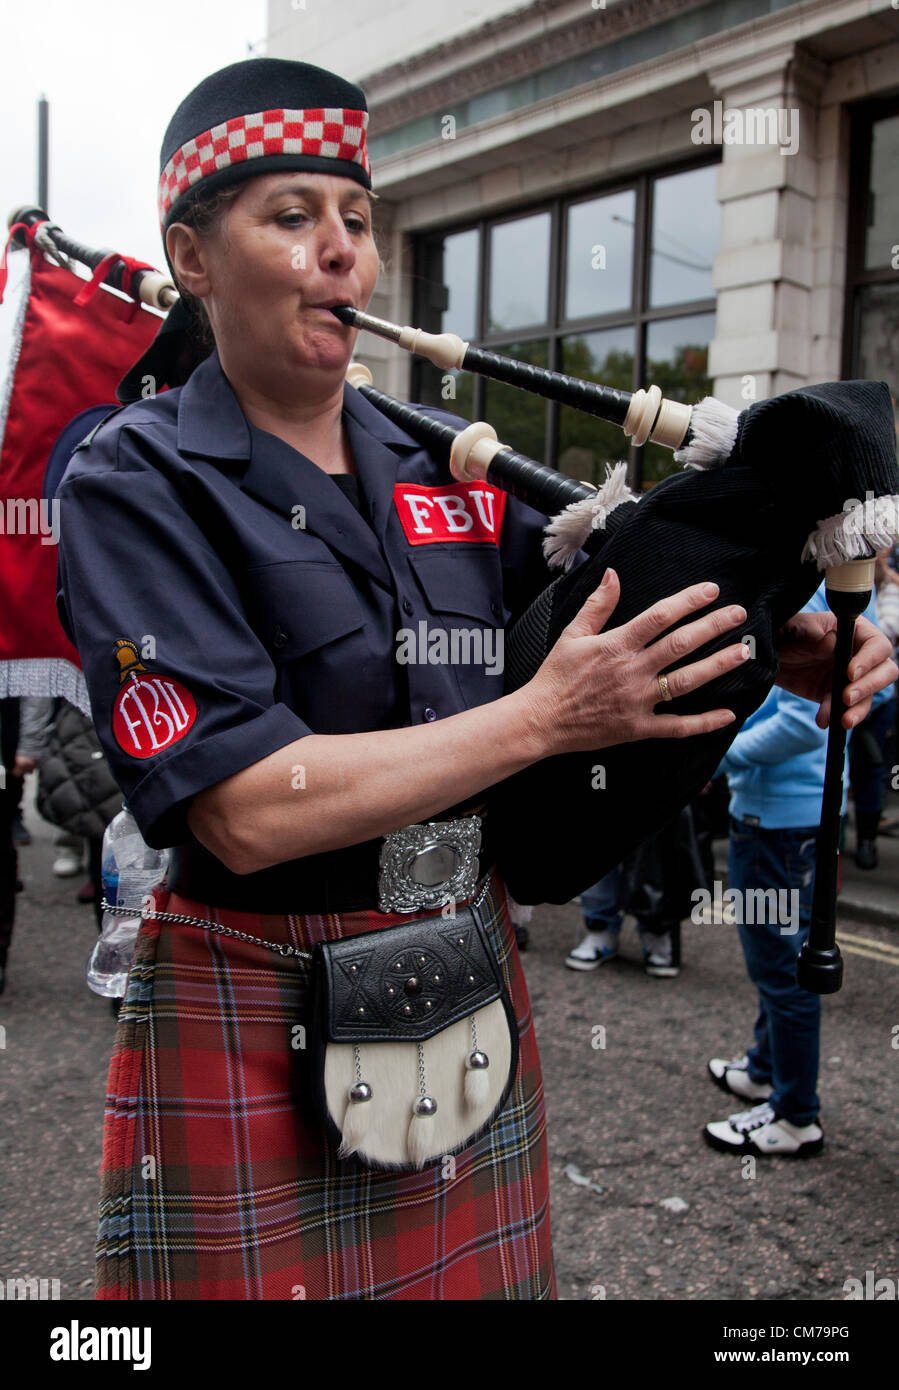 Scottish woman Fire Brigade Union member play bagpipe during Trade Unions' Coalition for Resistance anti-cuts rally in London Stock Photo